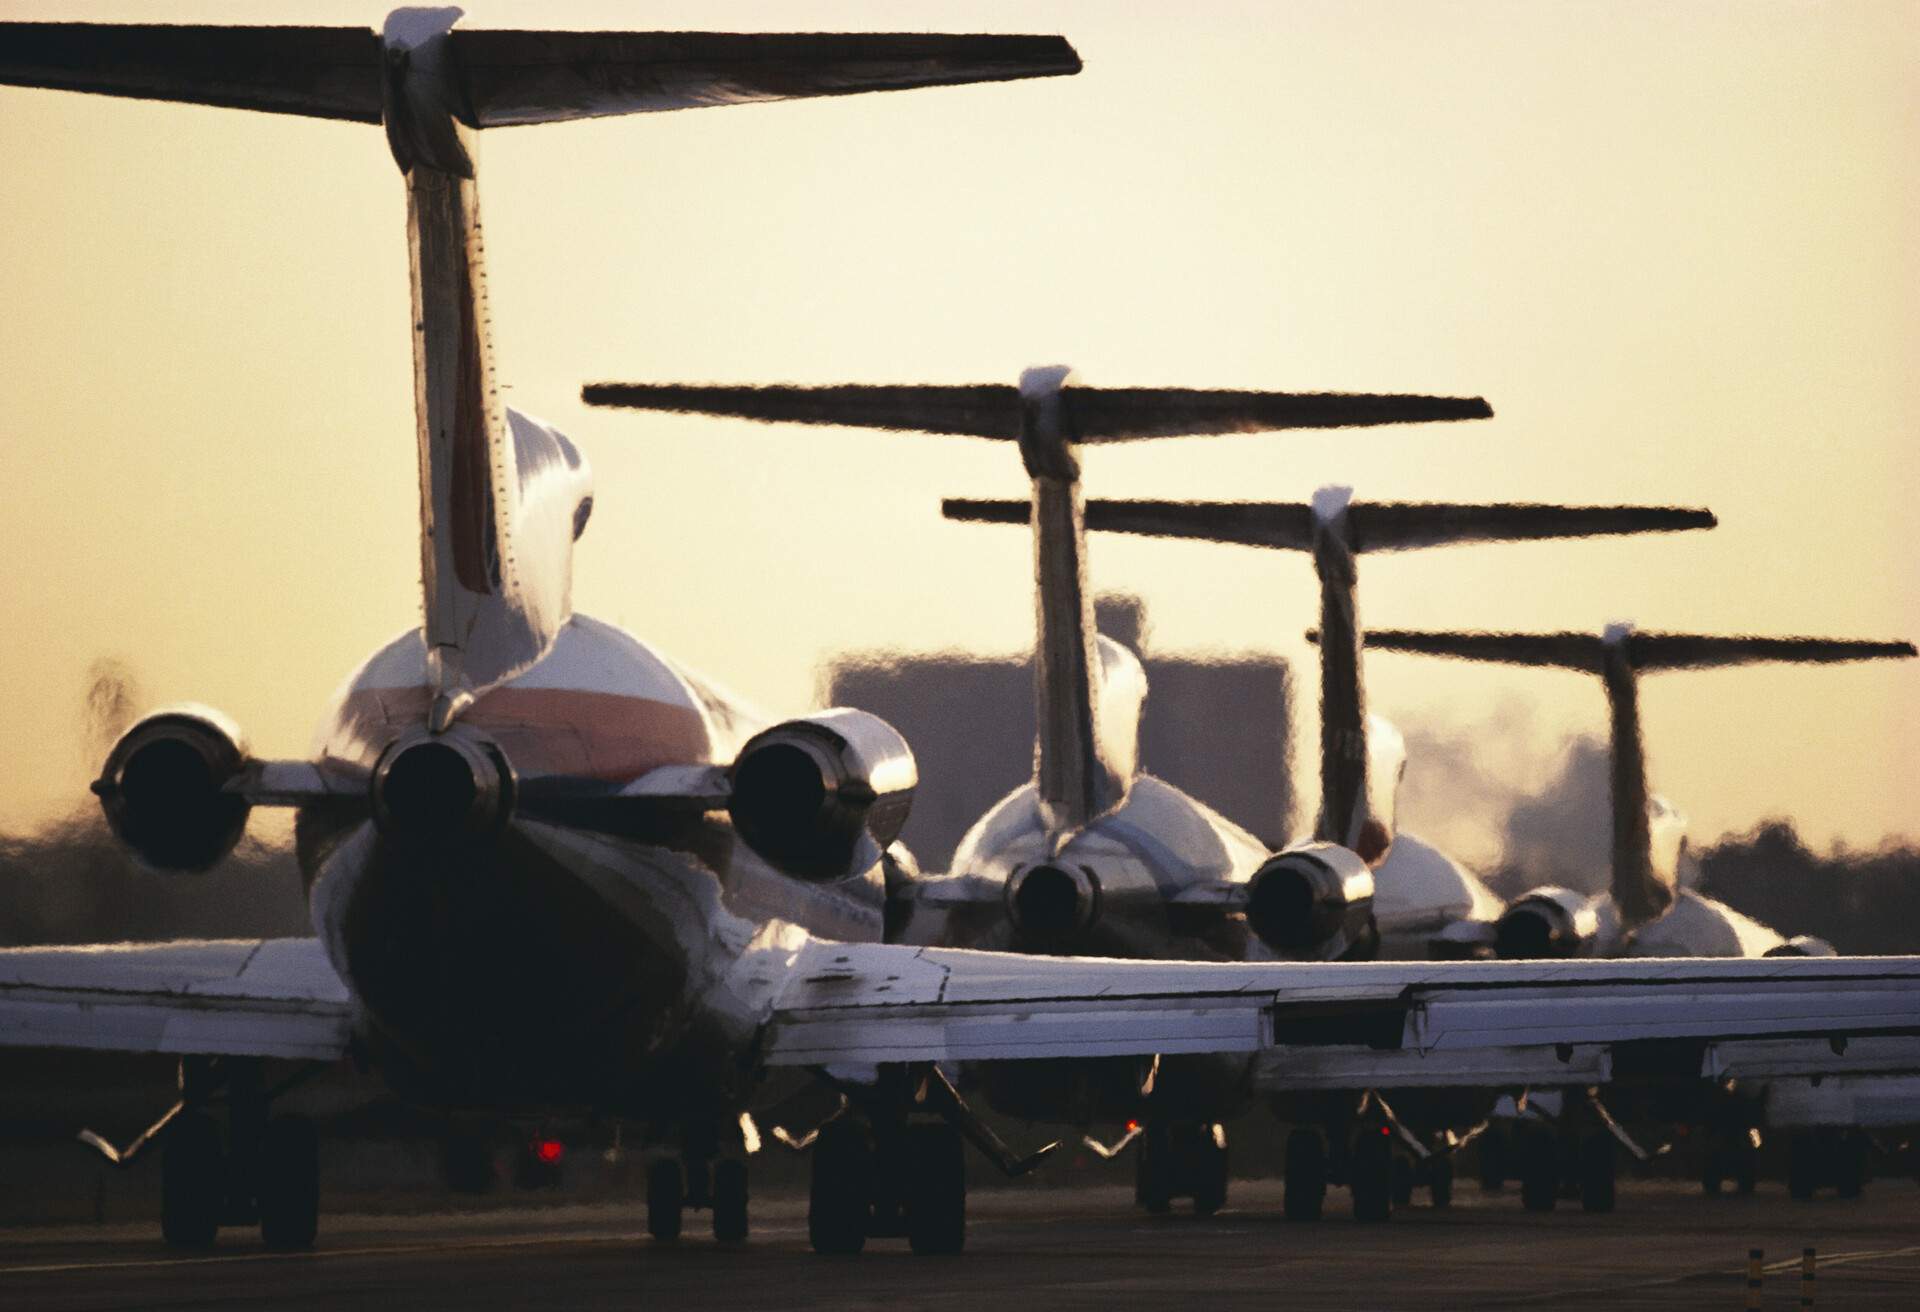 Airplanes lined up on runway ready to take off.